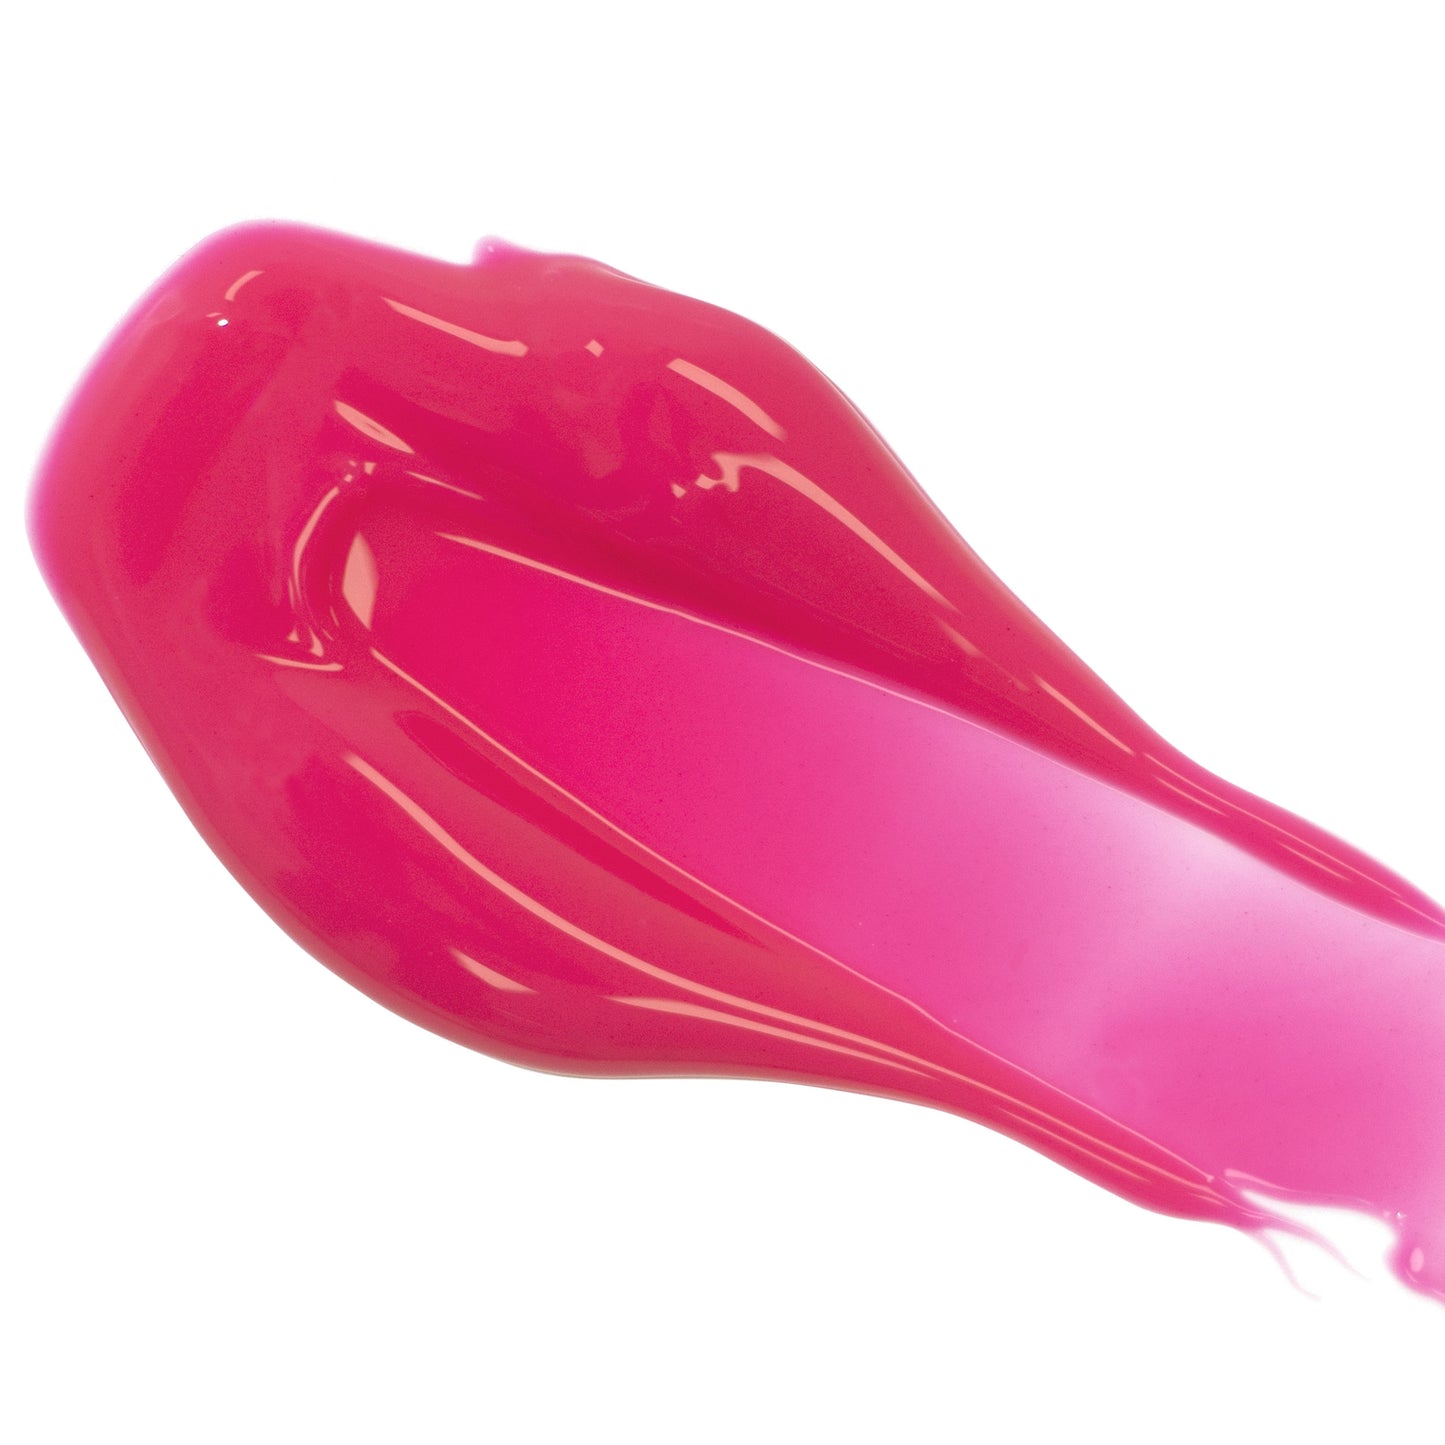 FitGlow Lip Serum - Liv - sheer magenta colour shown as a smear of lip serum on a white background